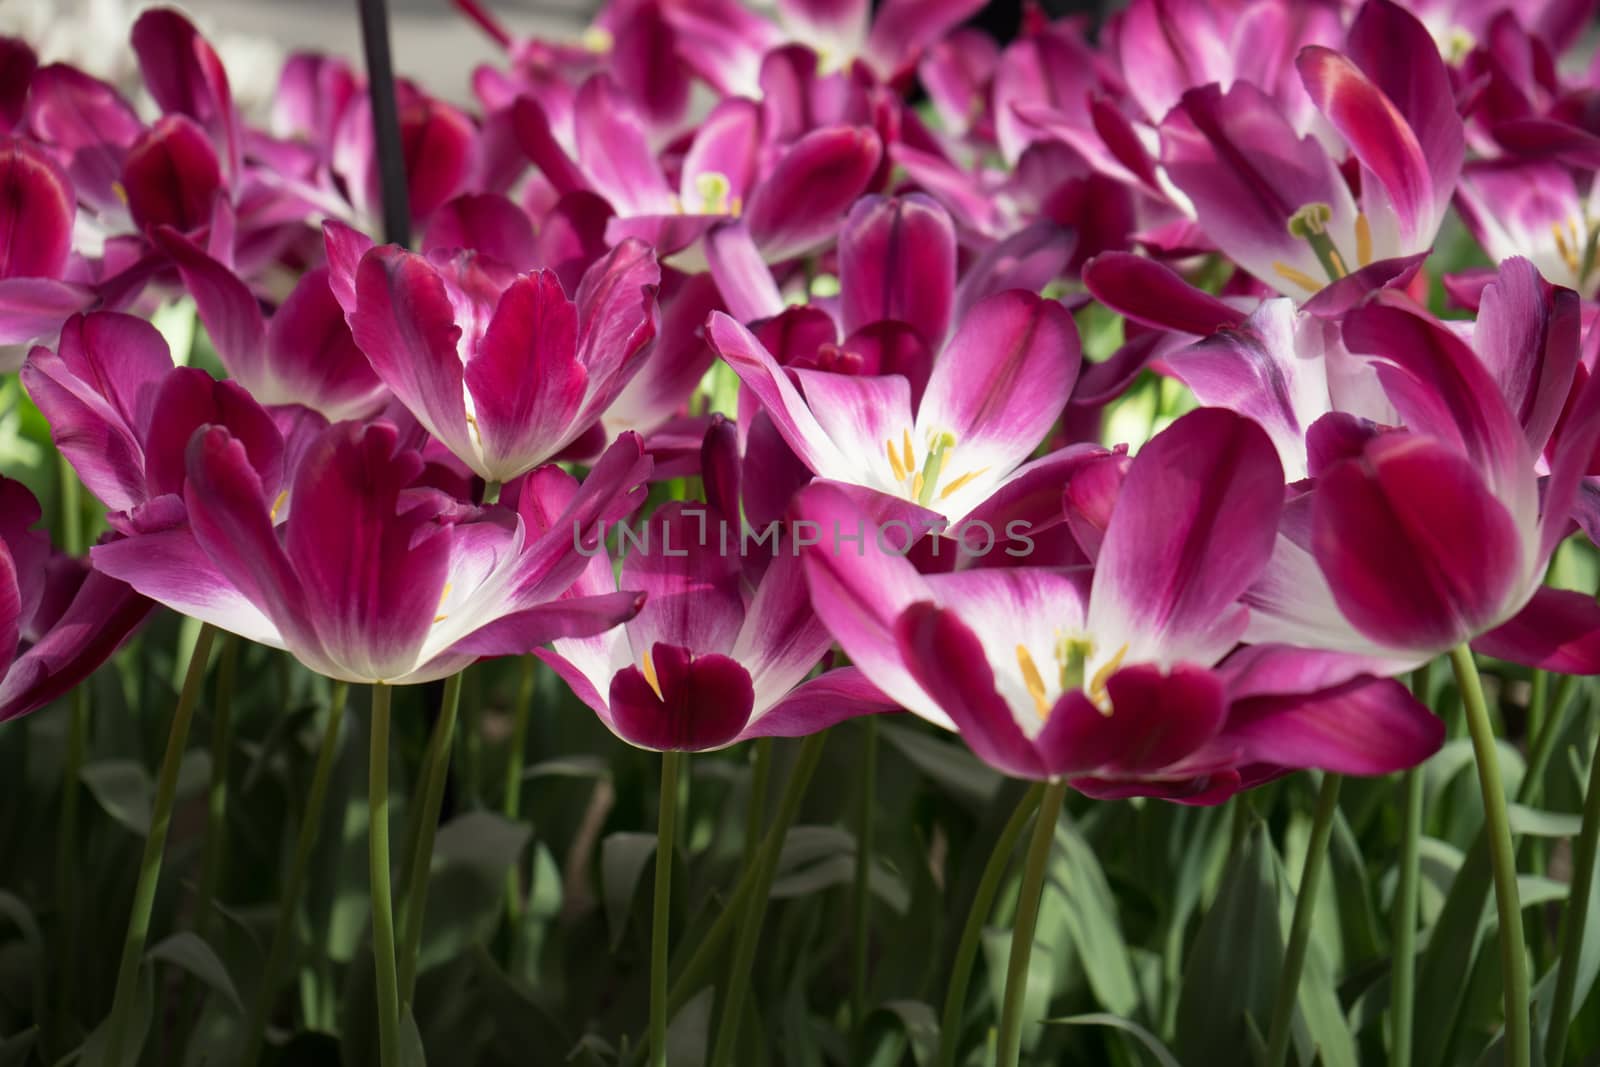 pink tulip flowers in a garden in Lisse, Netherlands, Europe on a bright summer day